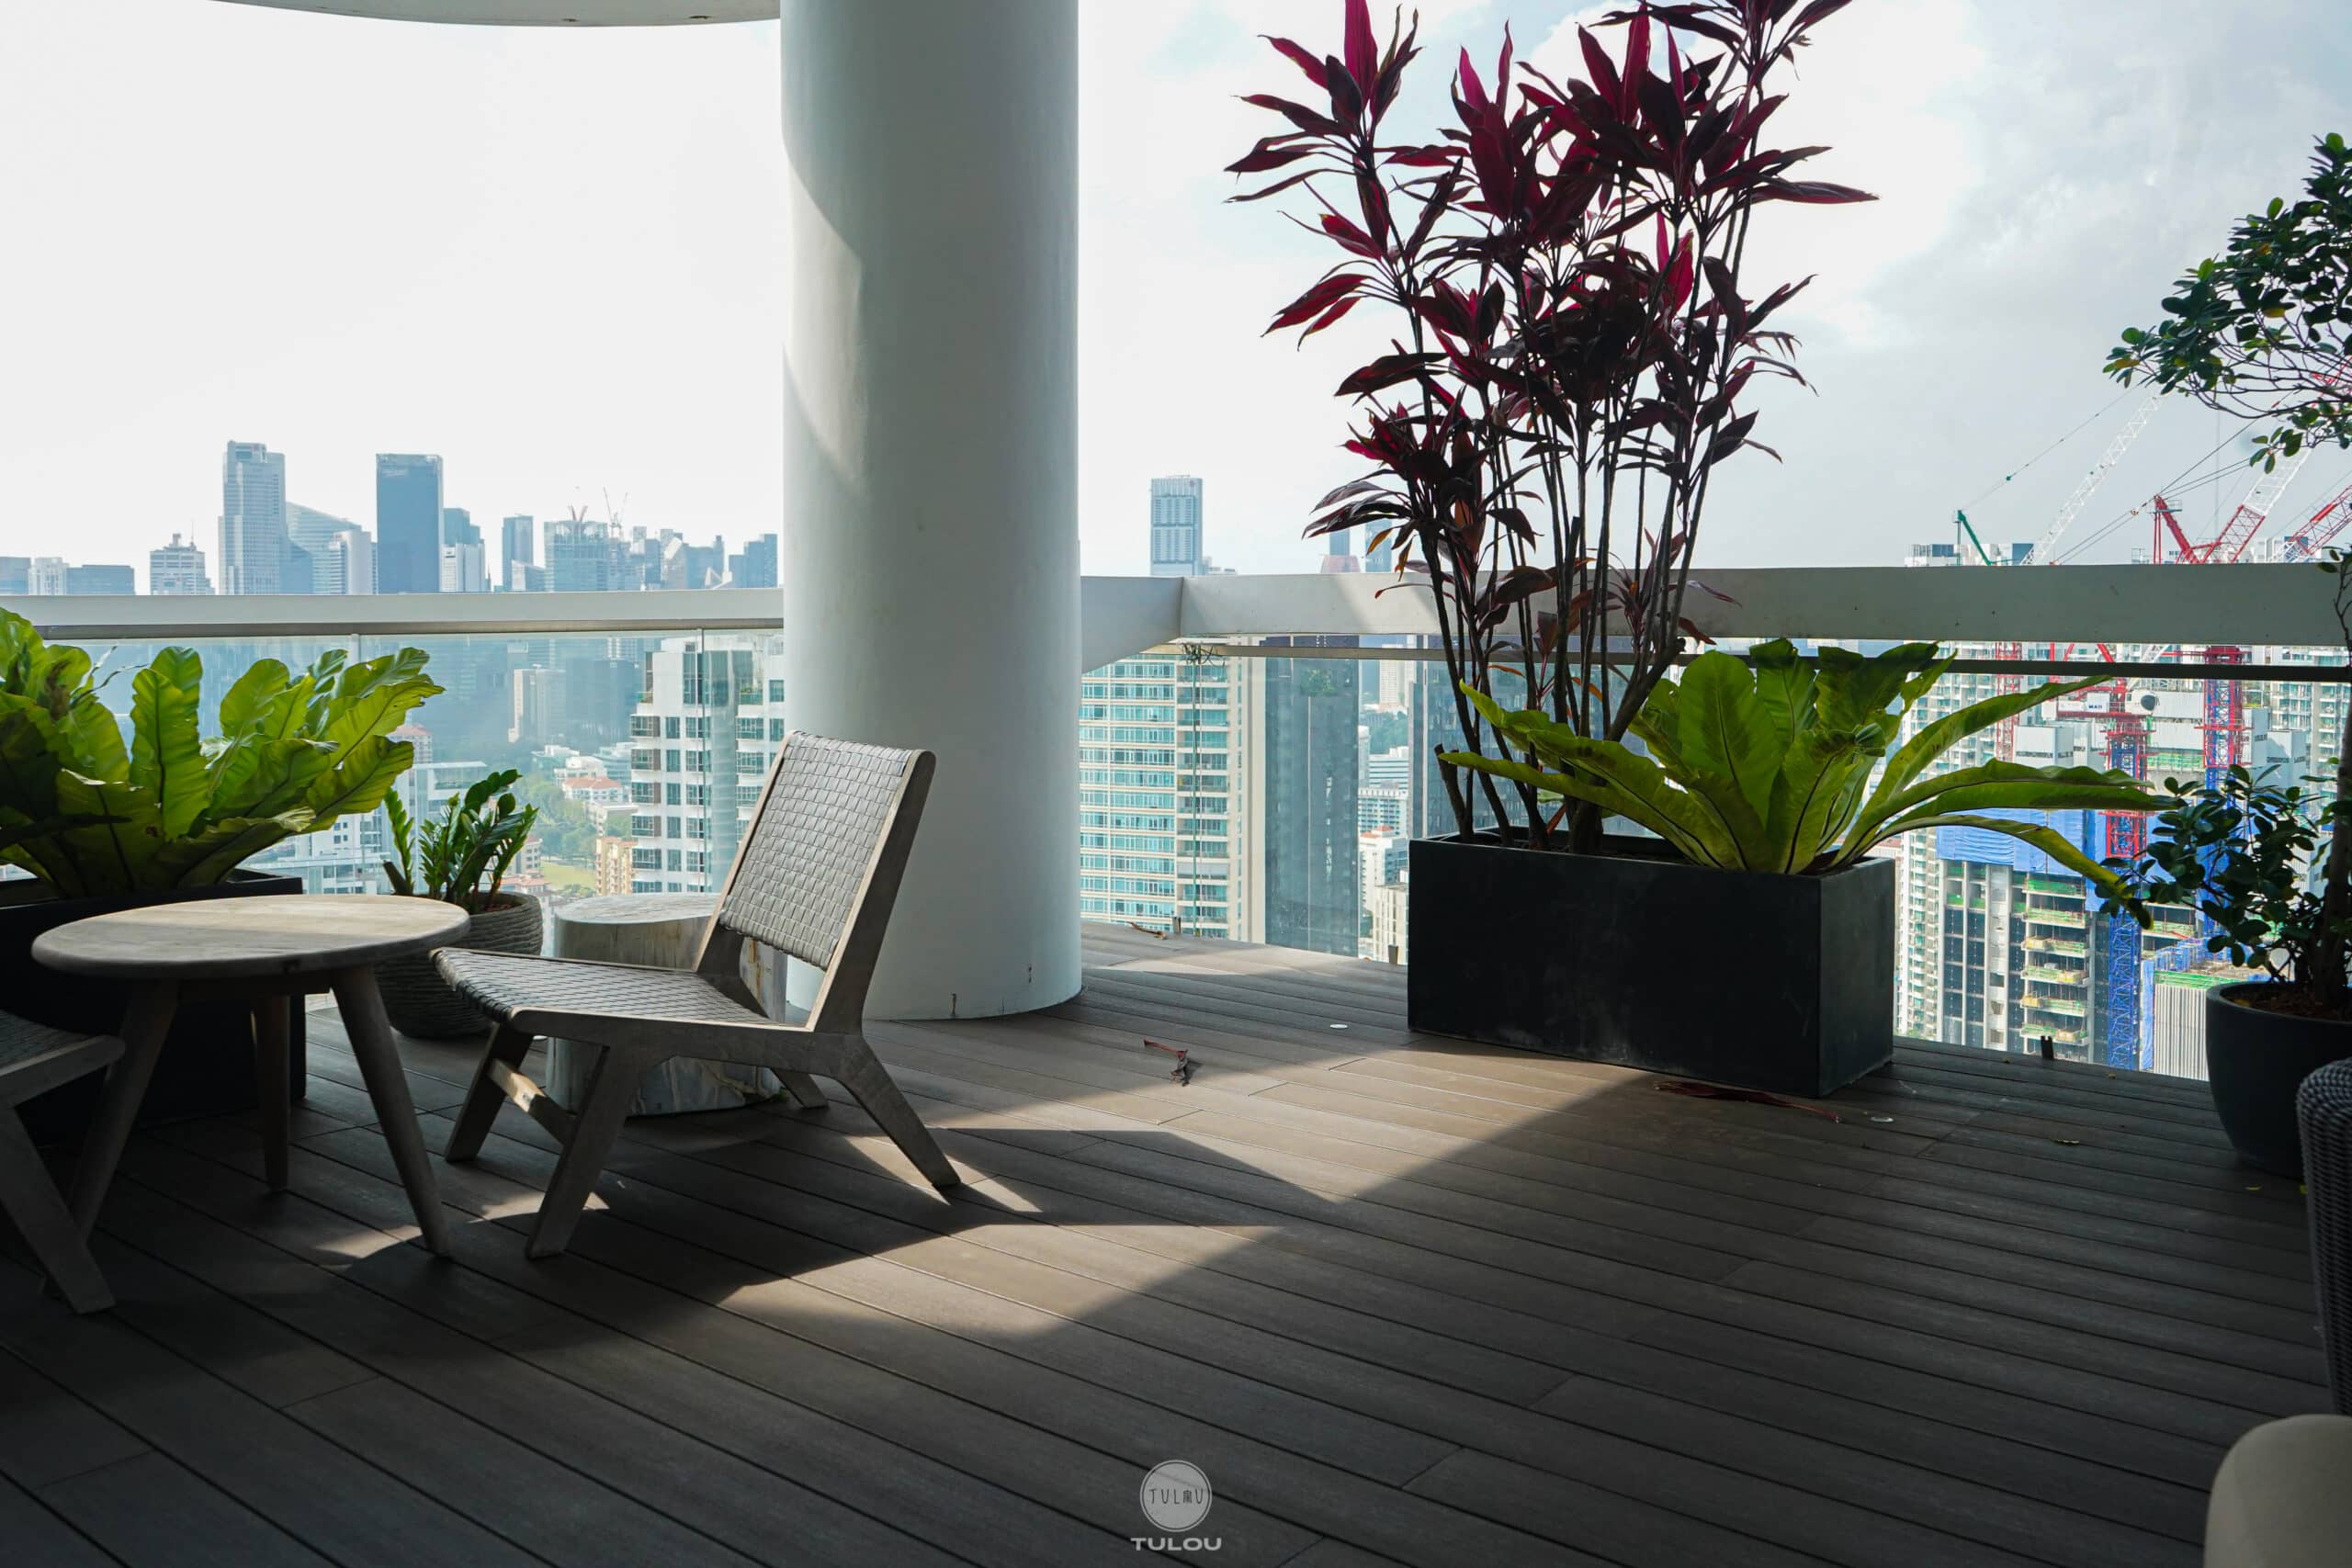 DSC03526 scaled - Bungalow or Condo: Choosing Tulou's Composite Timber Decking for Your Singaporean Home